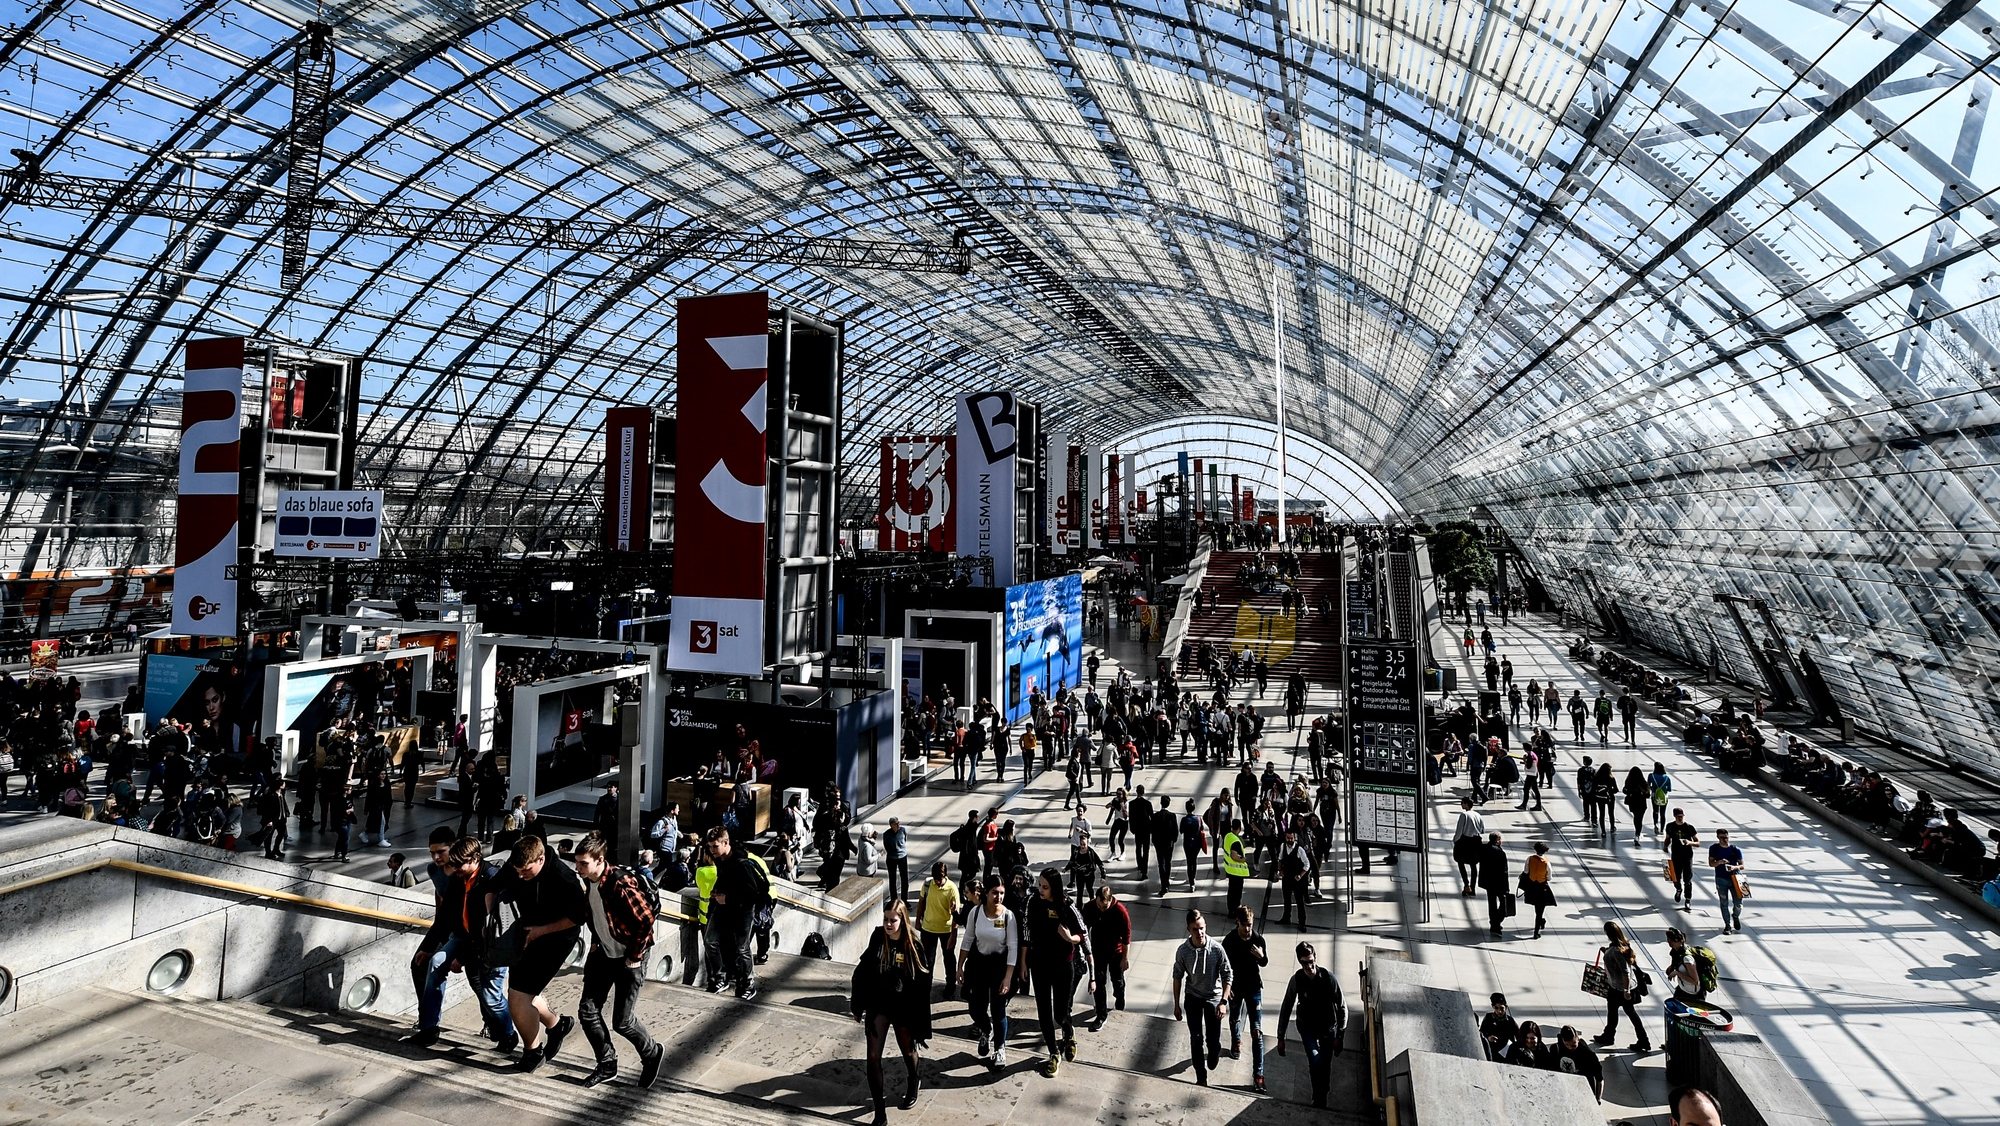 epa08266367 (FILE) - Visitors attend the Leipzig Book Fair, in Leipzig, Germany, 21 March 2019 (reissued 03 March 2020). According to media reports, organizers are thinking about wether to cancel or go on with the Leipzig Book Fair 2020 due to coronavirus Covid-19 spread. The fair is planned on on 12 to 15 March.  EPA/FILIP SINGER *** Local Caption *** 55070917